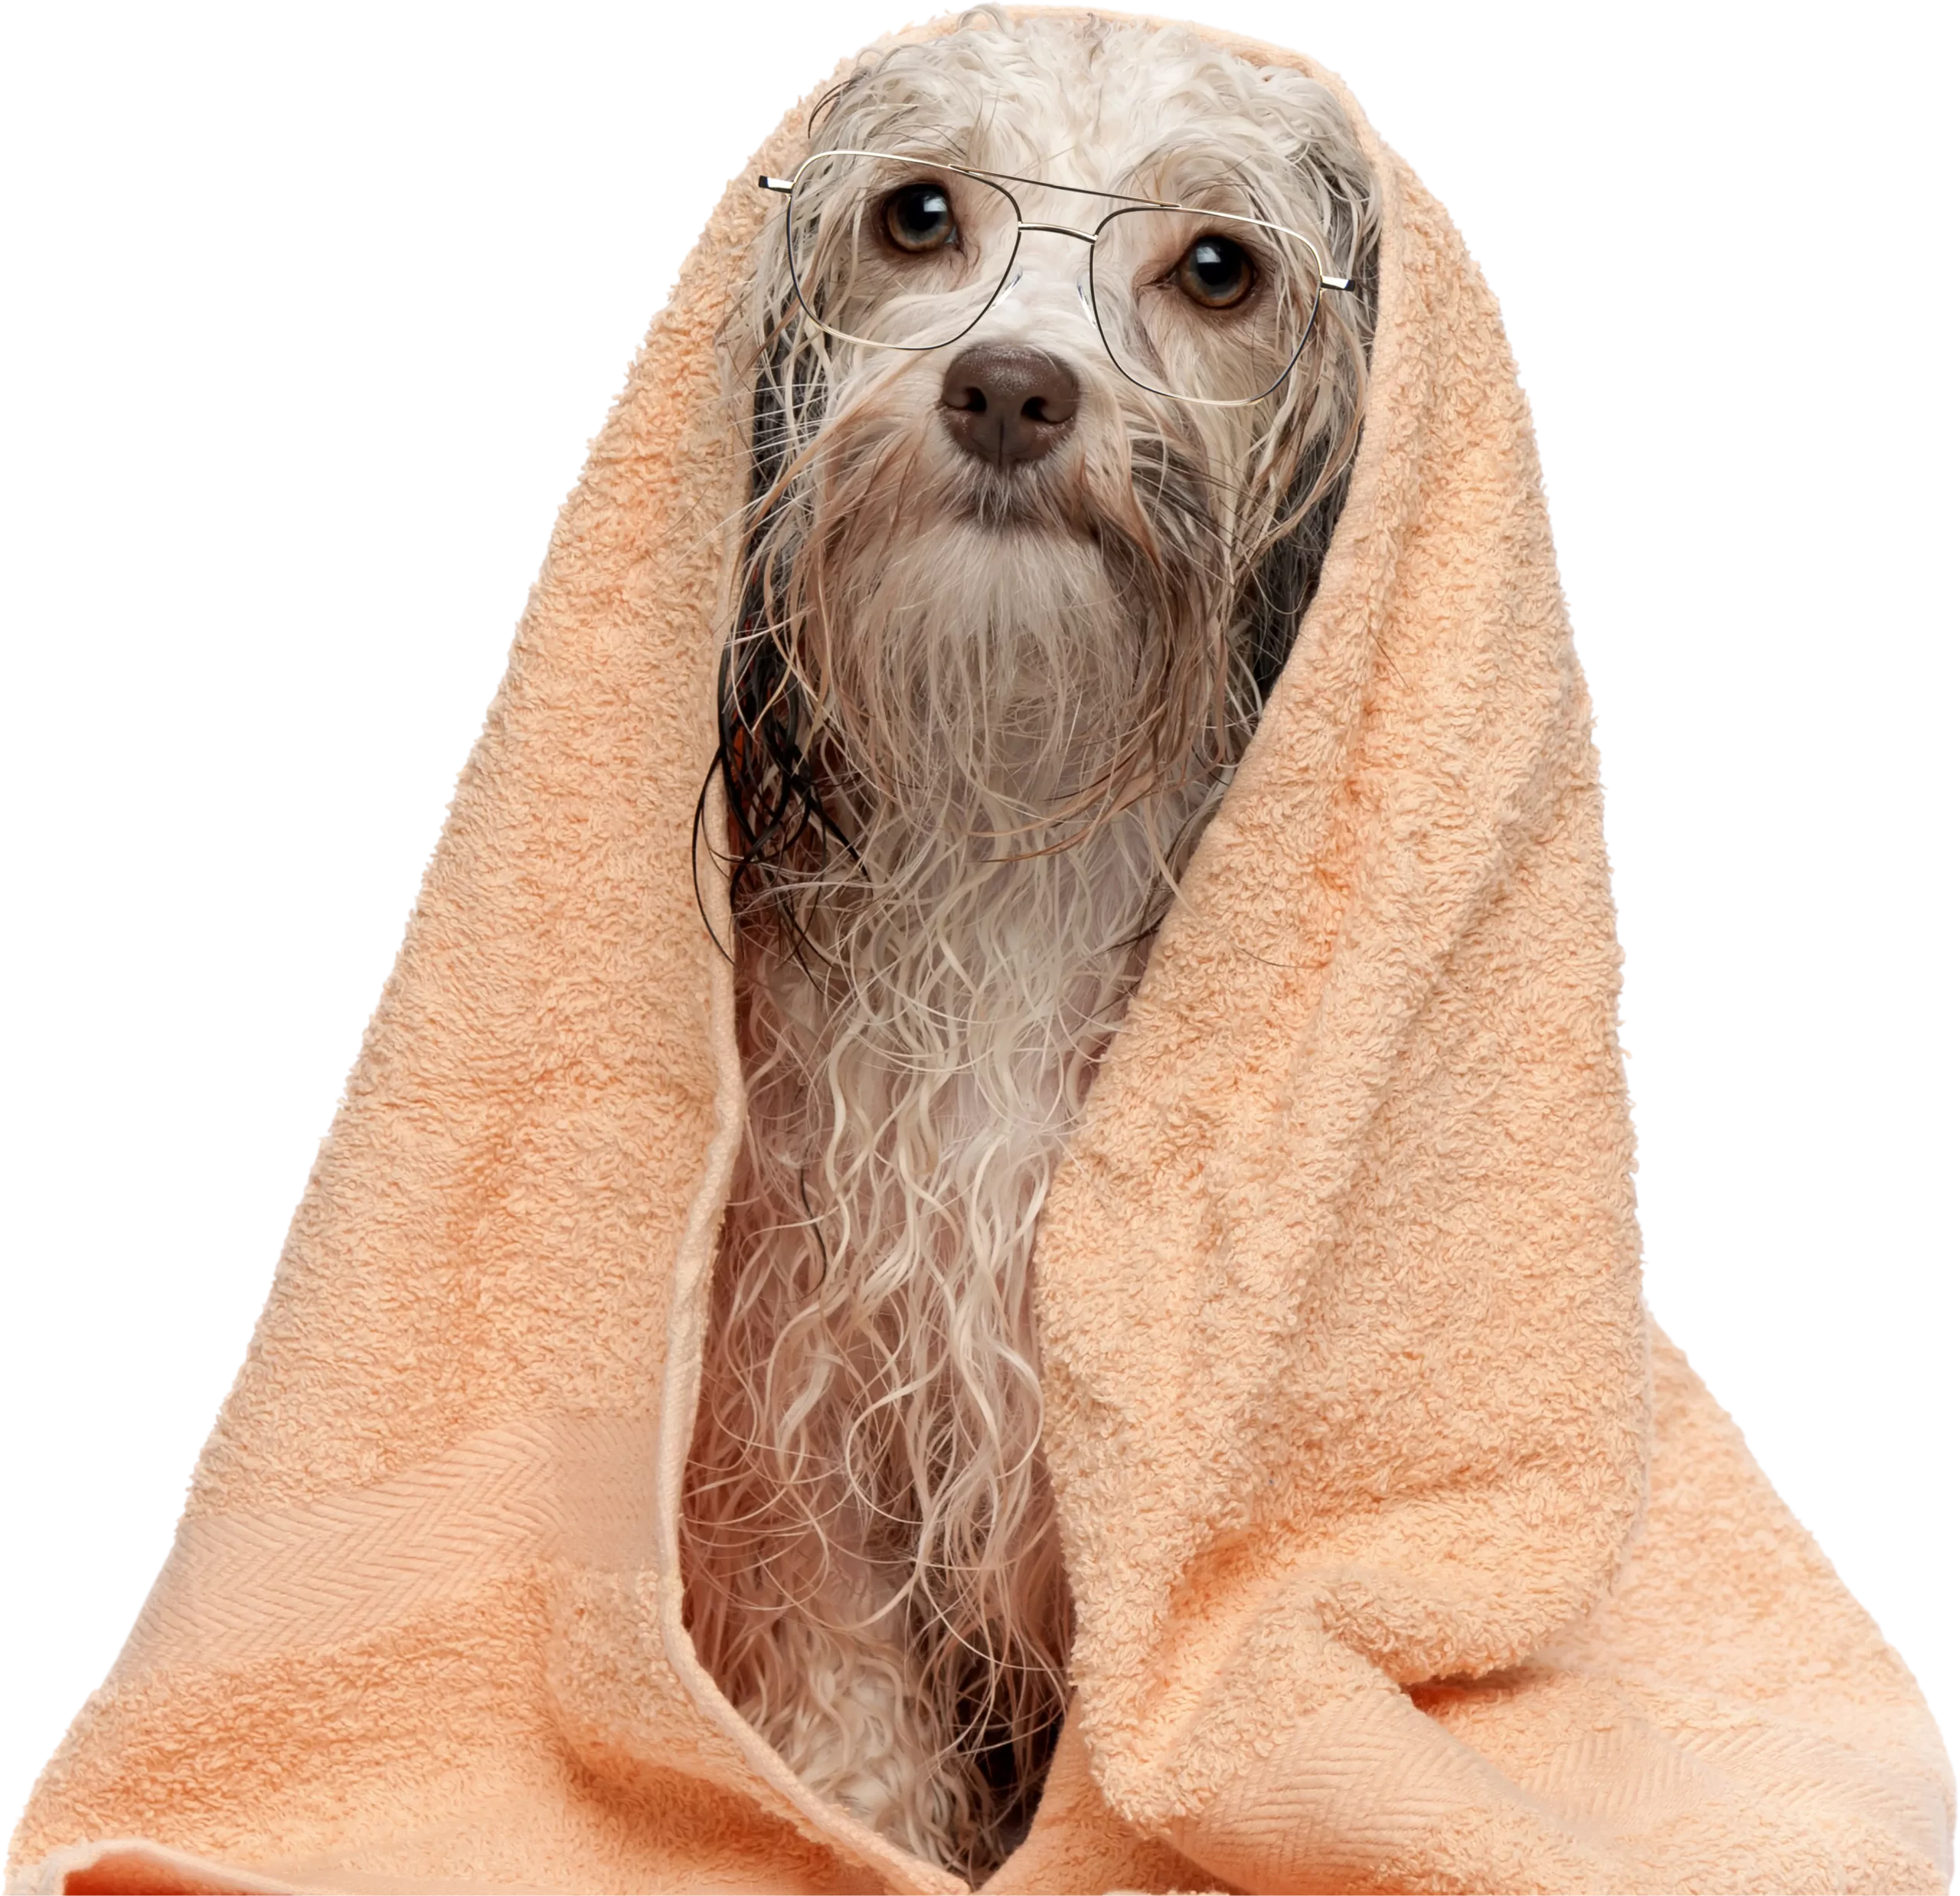 Wet dog wearing glasses and covered wit a towel.